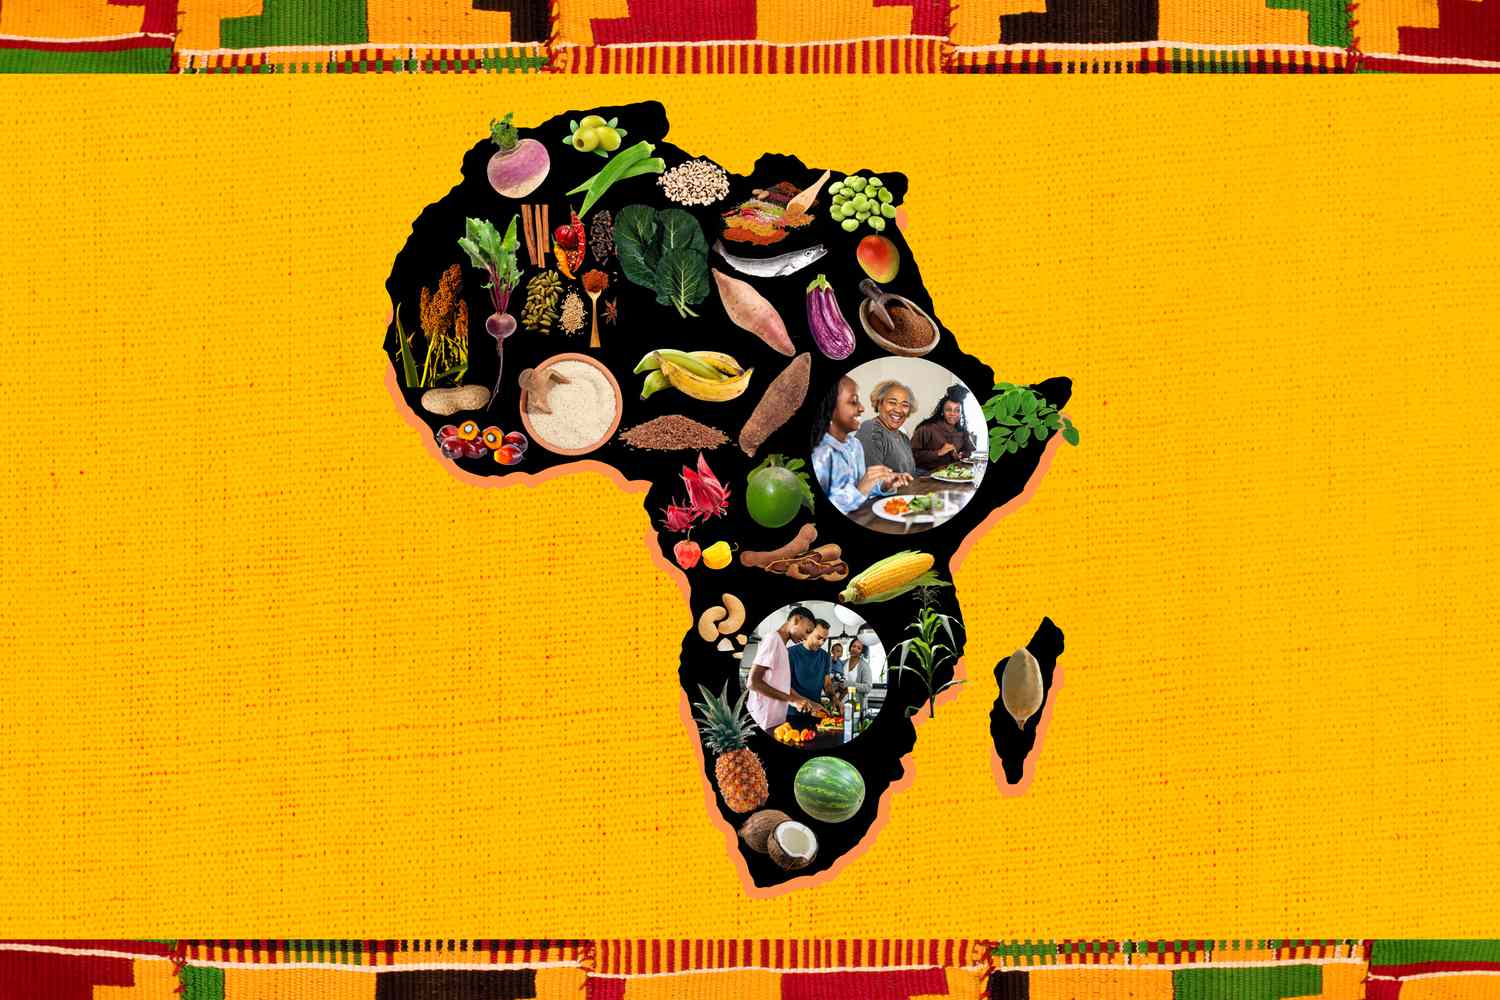 African Heritage Diet as Medicine: How Black Food Can Heal the Community